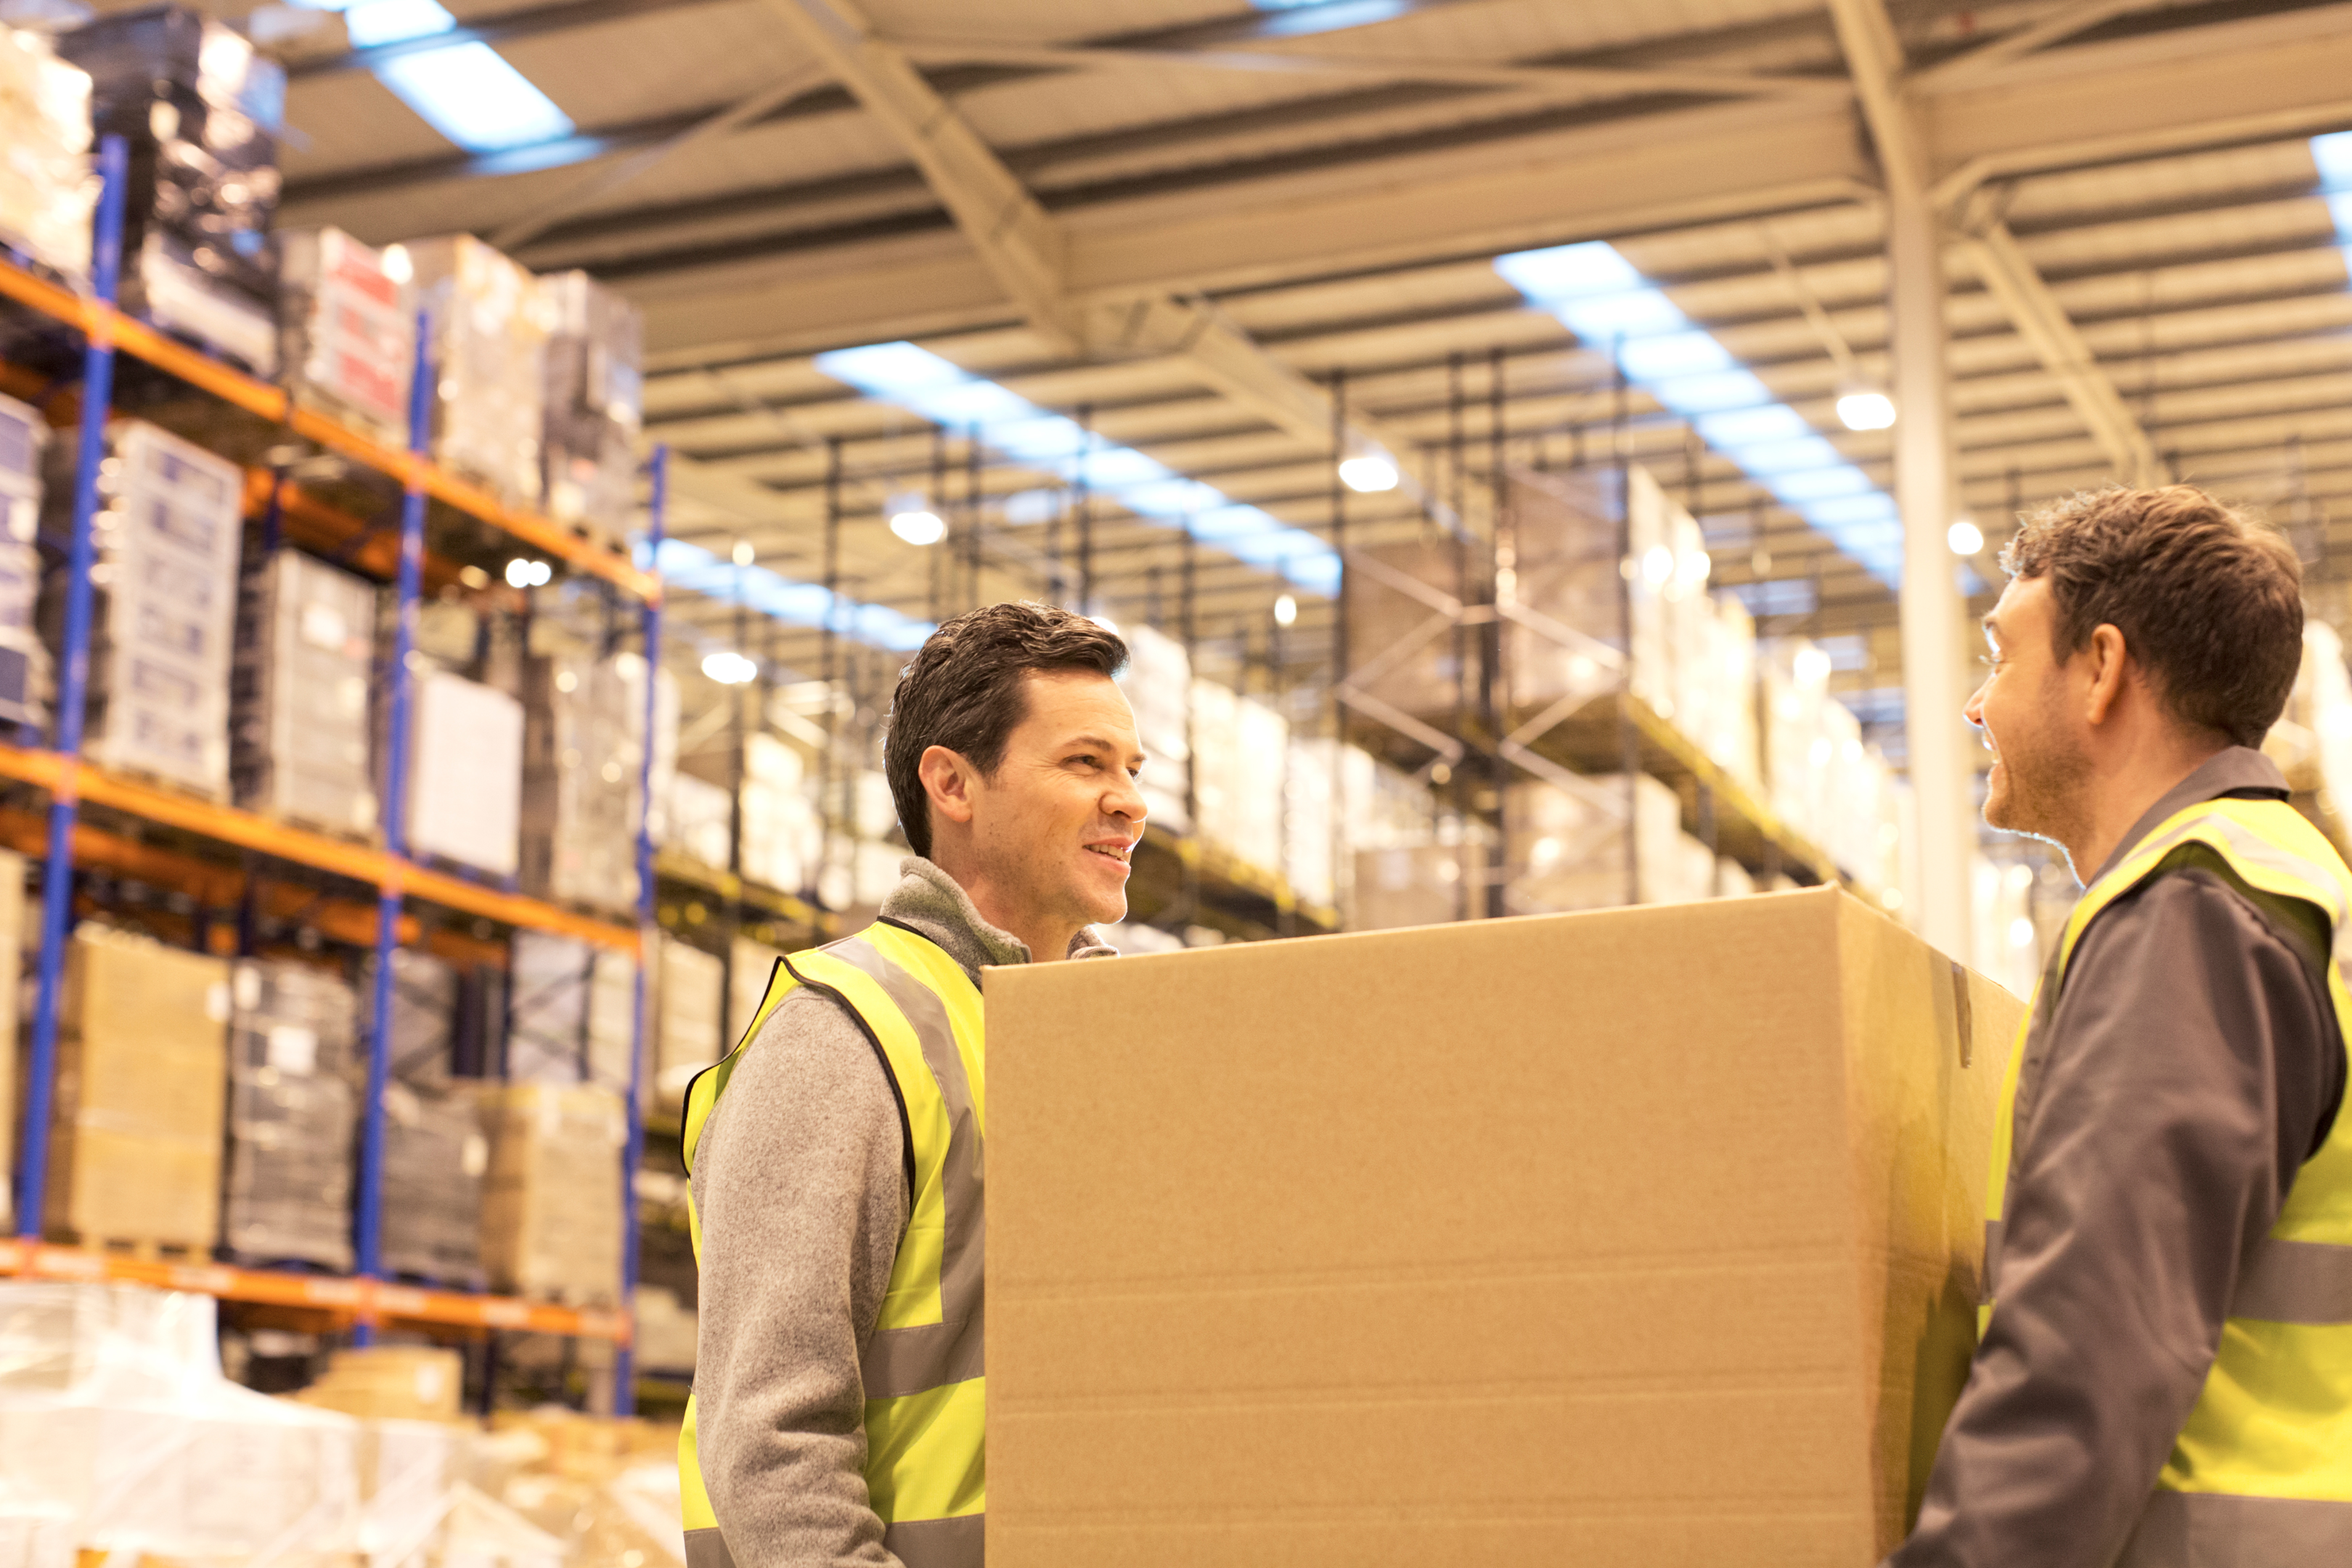 Two men wearing yellow vests carry a box in a warehouse.